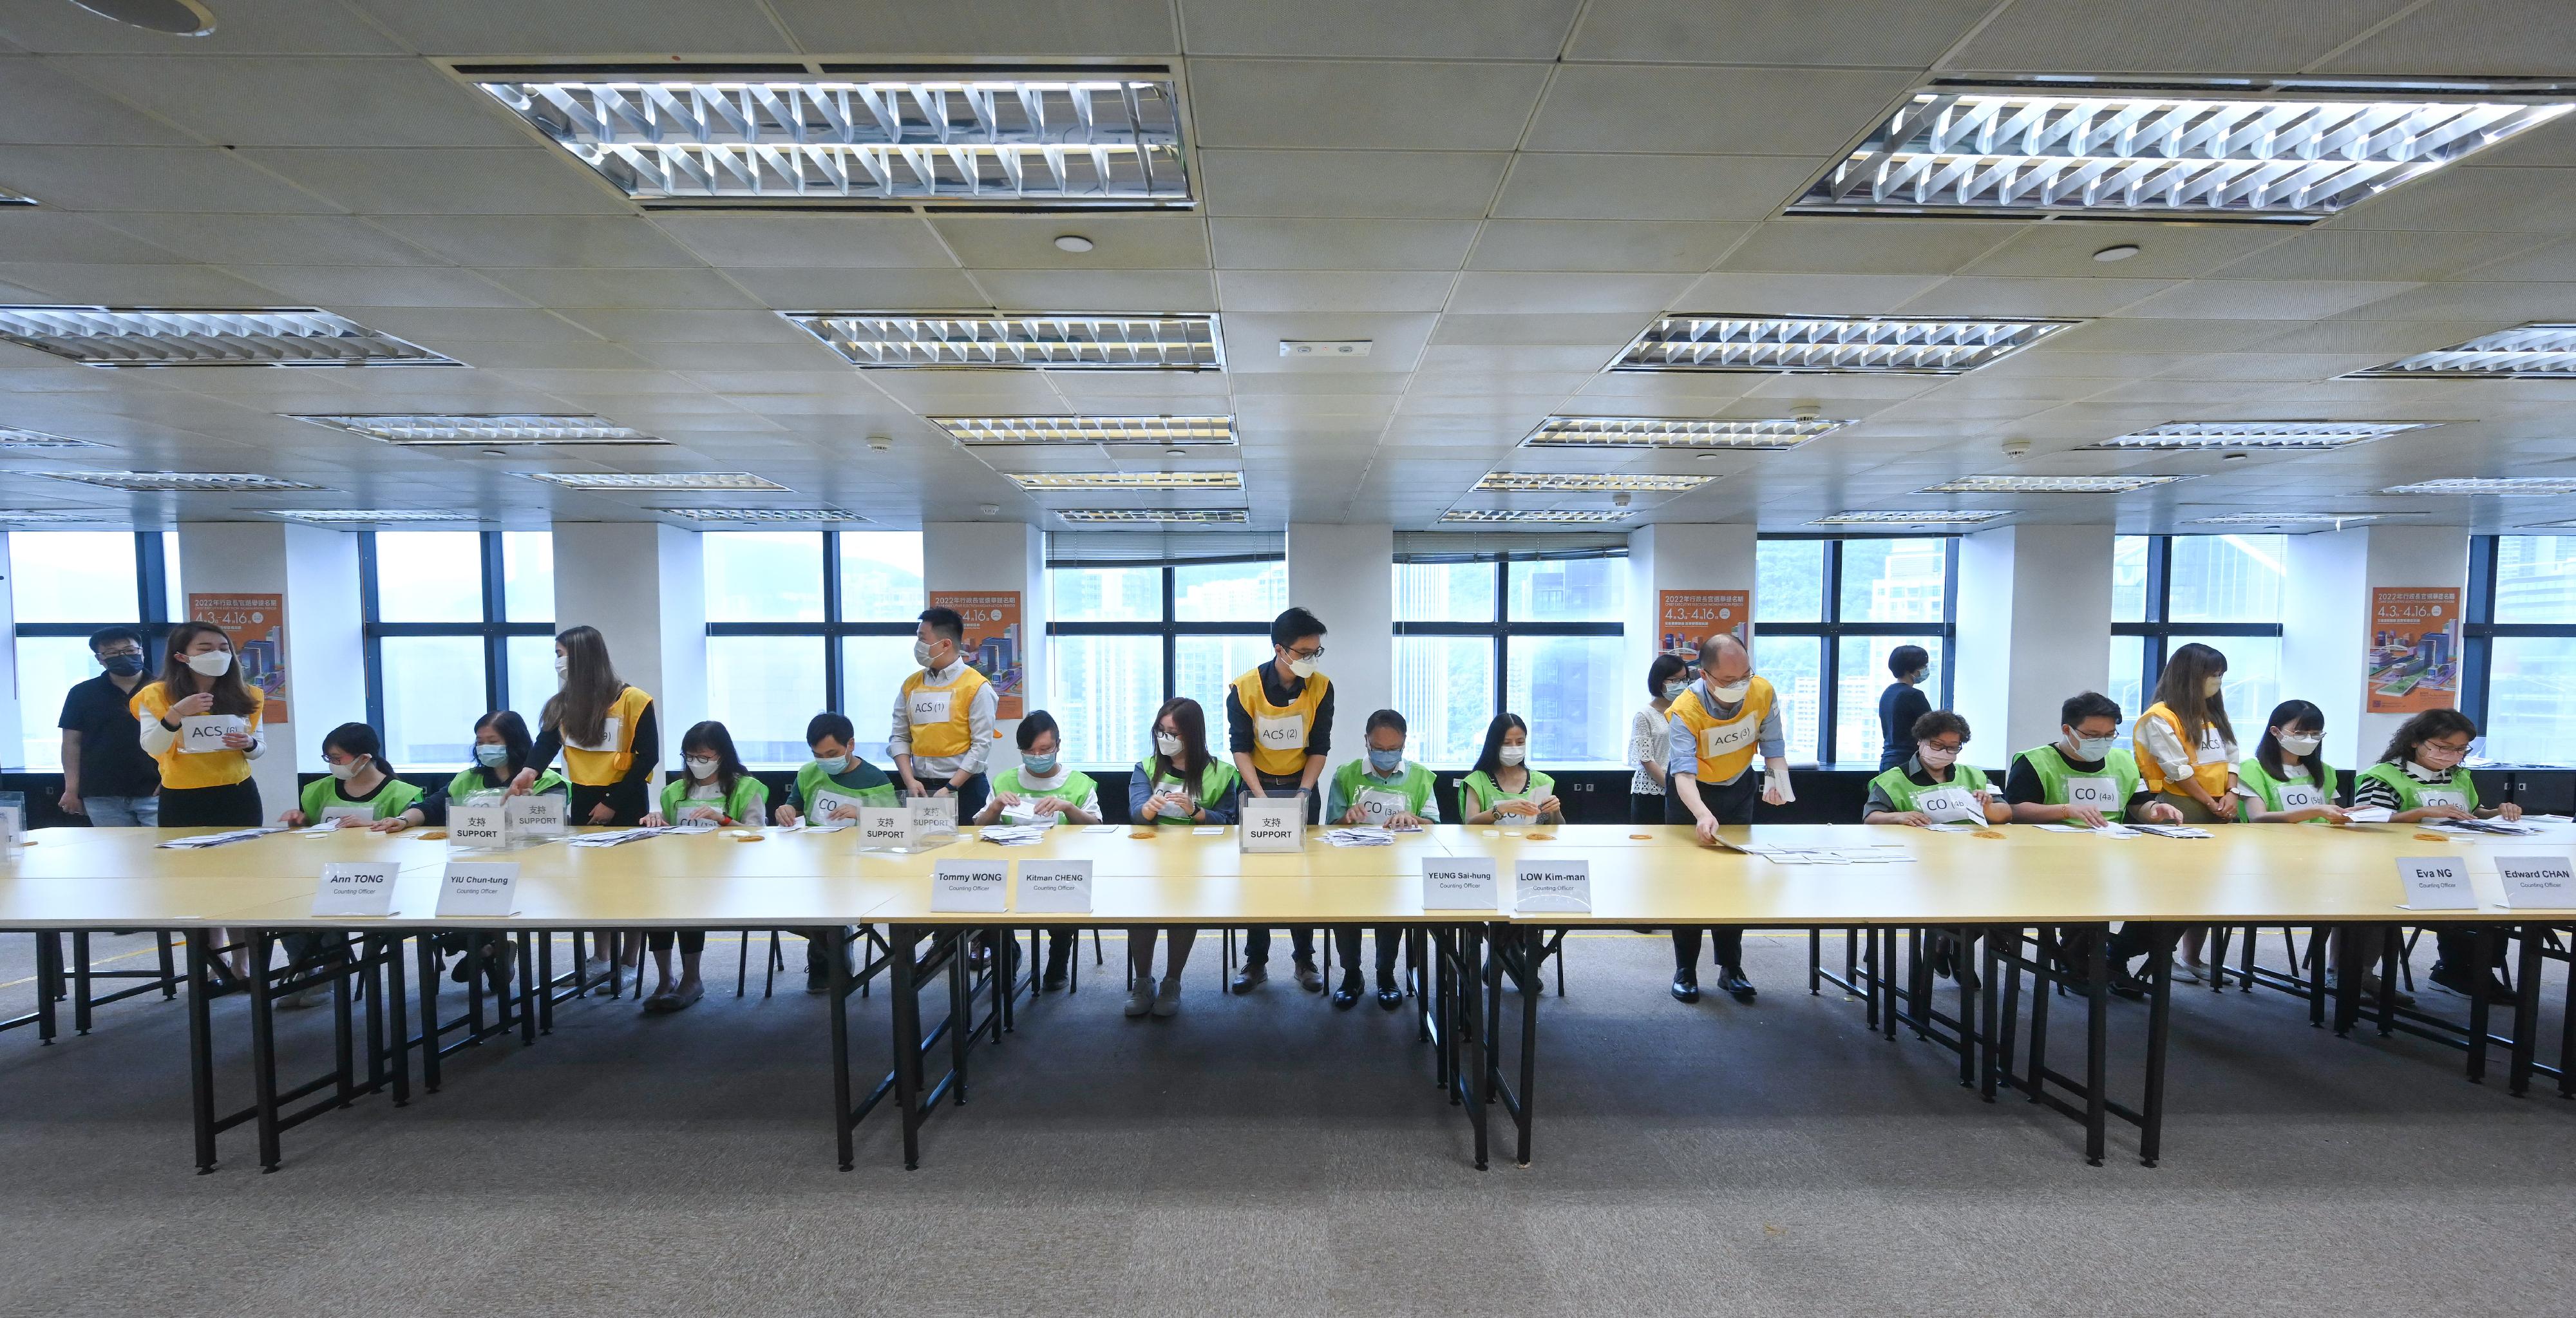 The 2022 Chief Executive Election will be held on May 8. The Registration and Electoral Office arranged, on the past few days, online and hands-on training sessions for electoral staff who will work in the main polling station and central counting station. Photo shows counting staff in a simulation of the vote count.